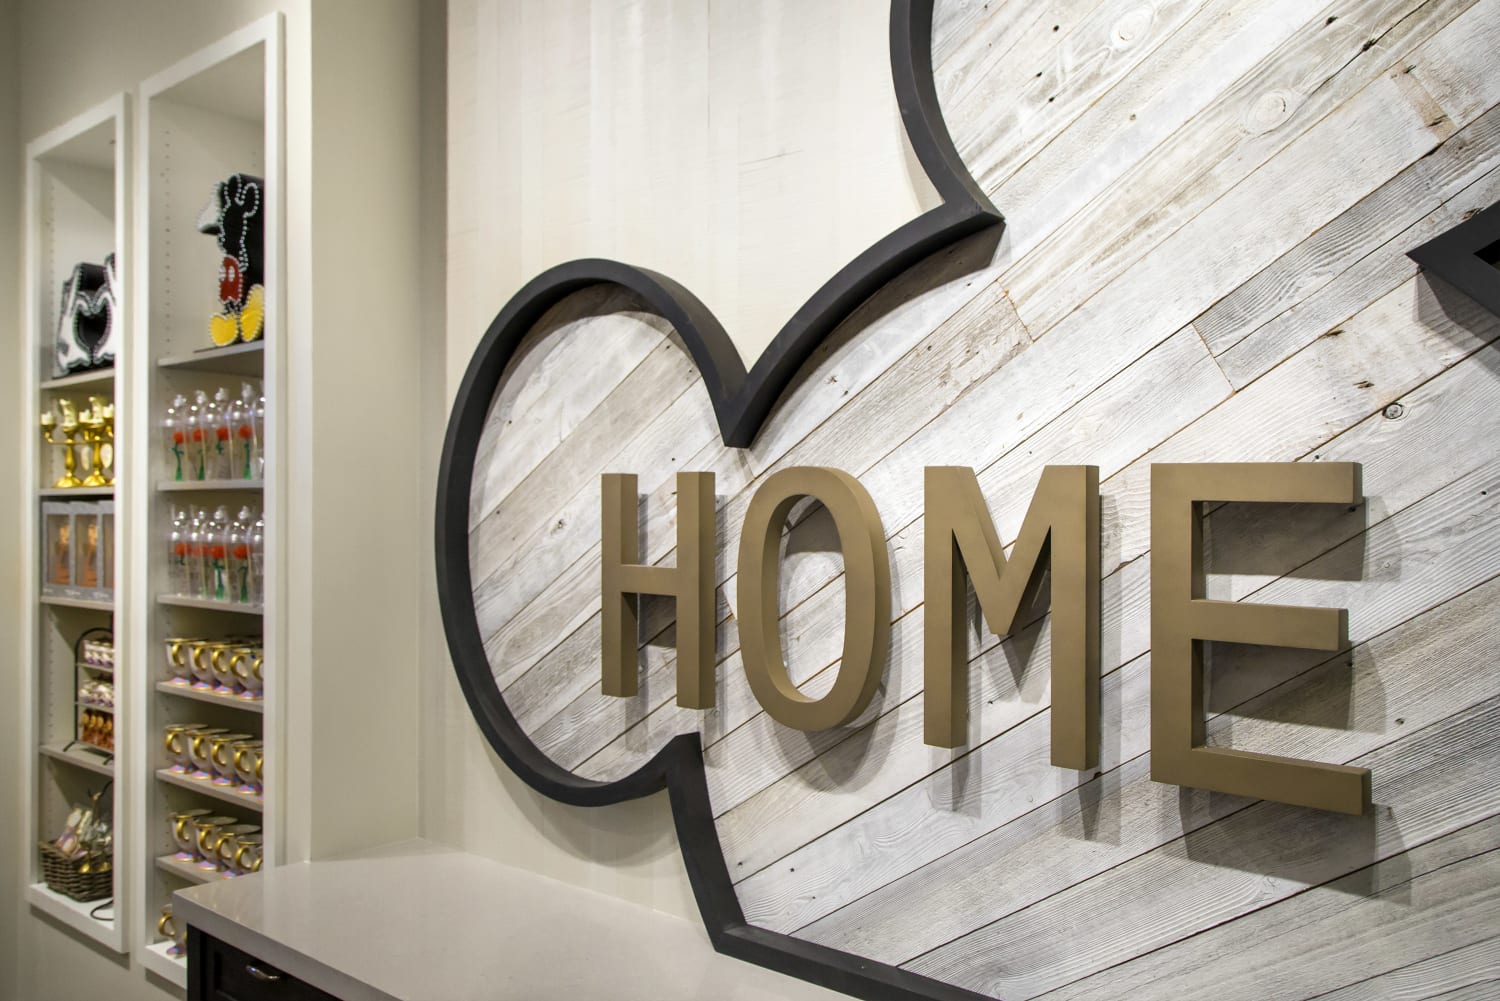 UPDATE: Disney launches Disney Home furnishings brand in Europe; U.S.  launch planned - Furniture Today